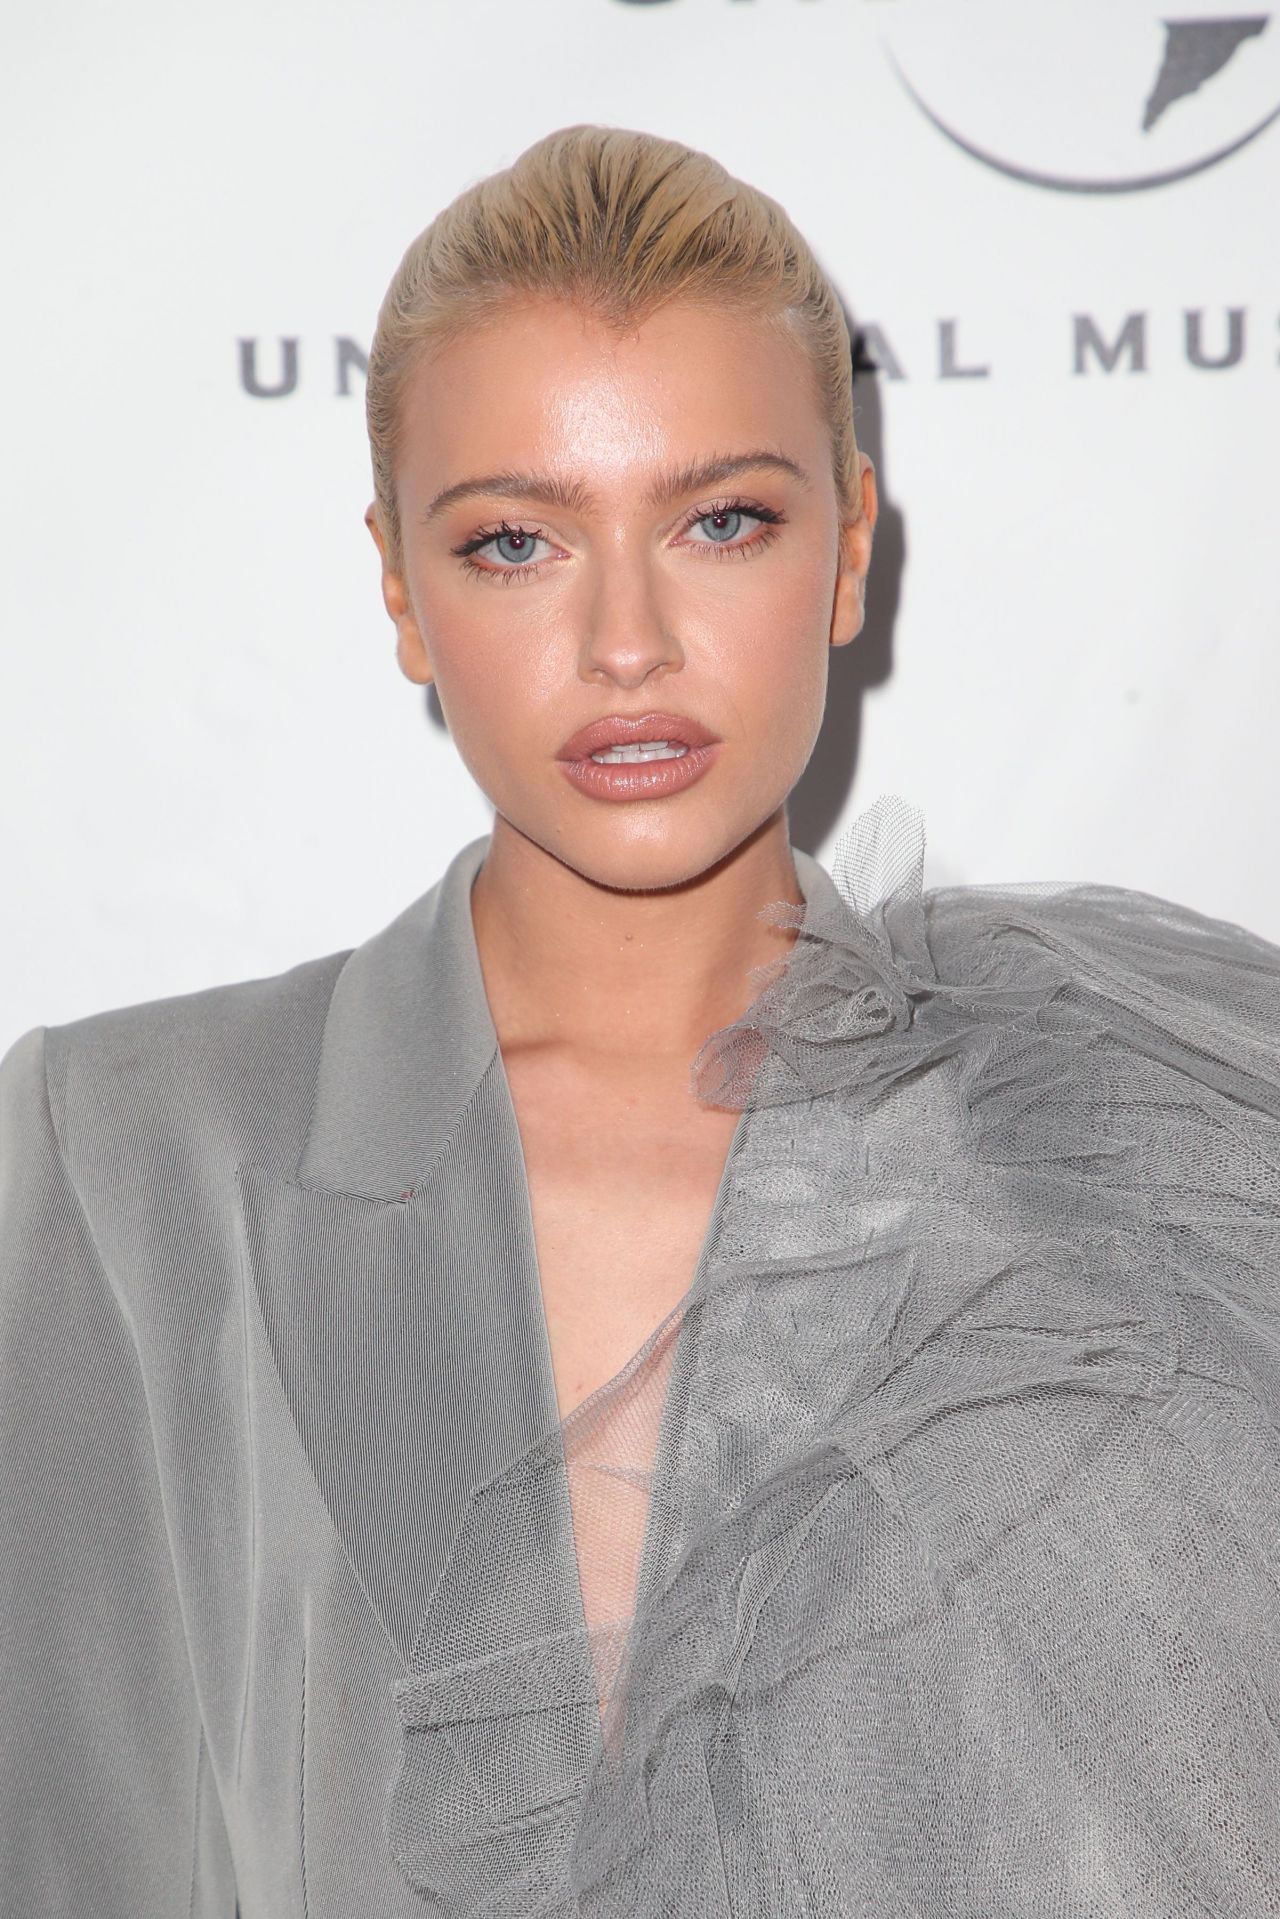 alice-chater-universal-music-group-grammy-after-party-02-10-2019-8.jpg